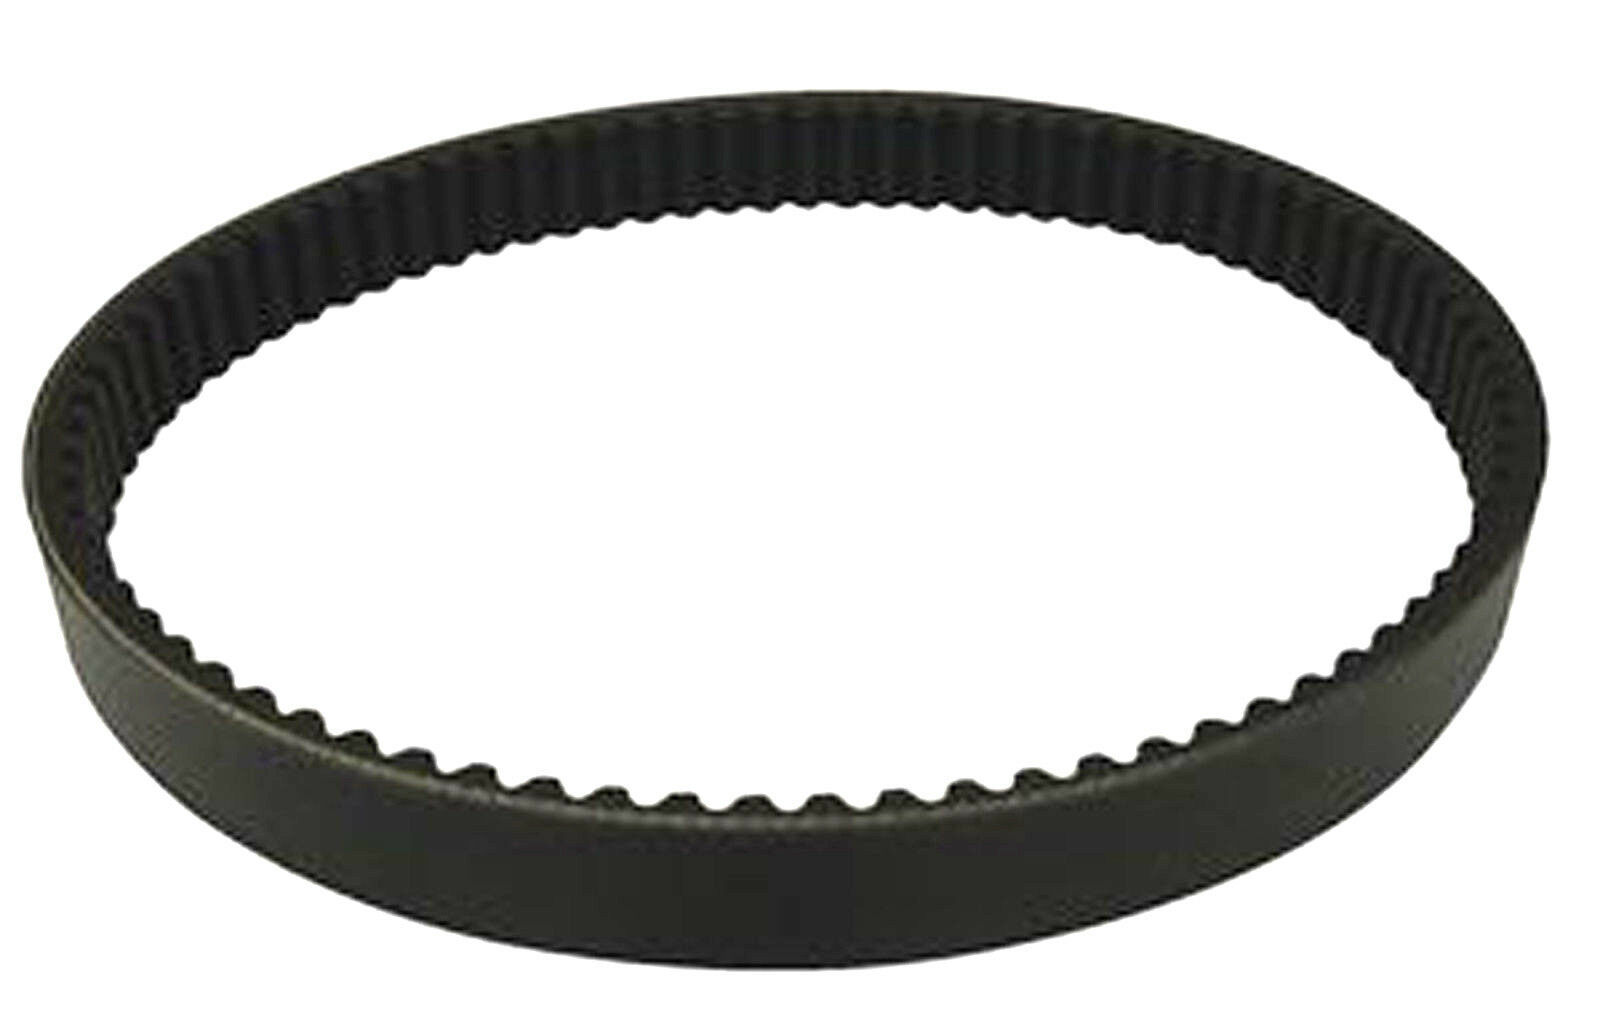 Primary image for **New Replacement Belt** for use with Delta 15-000 Drill Press Belt